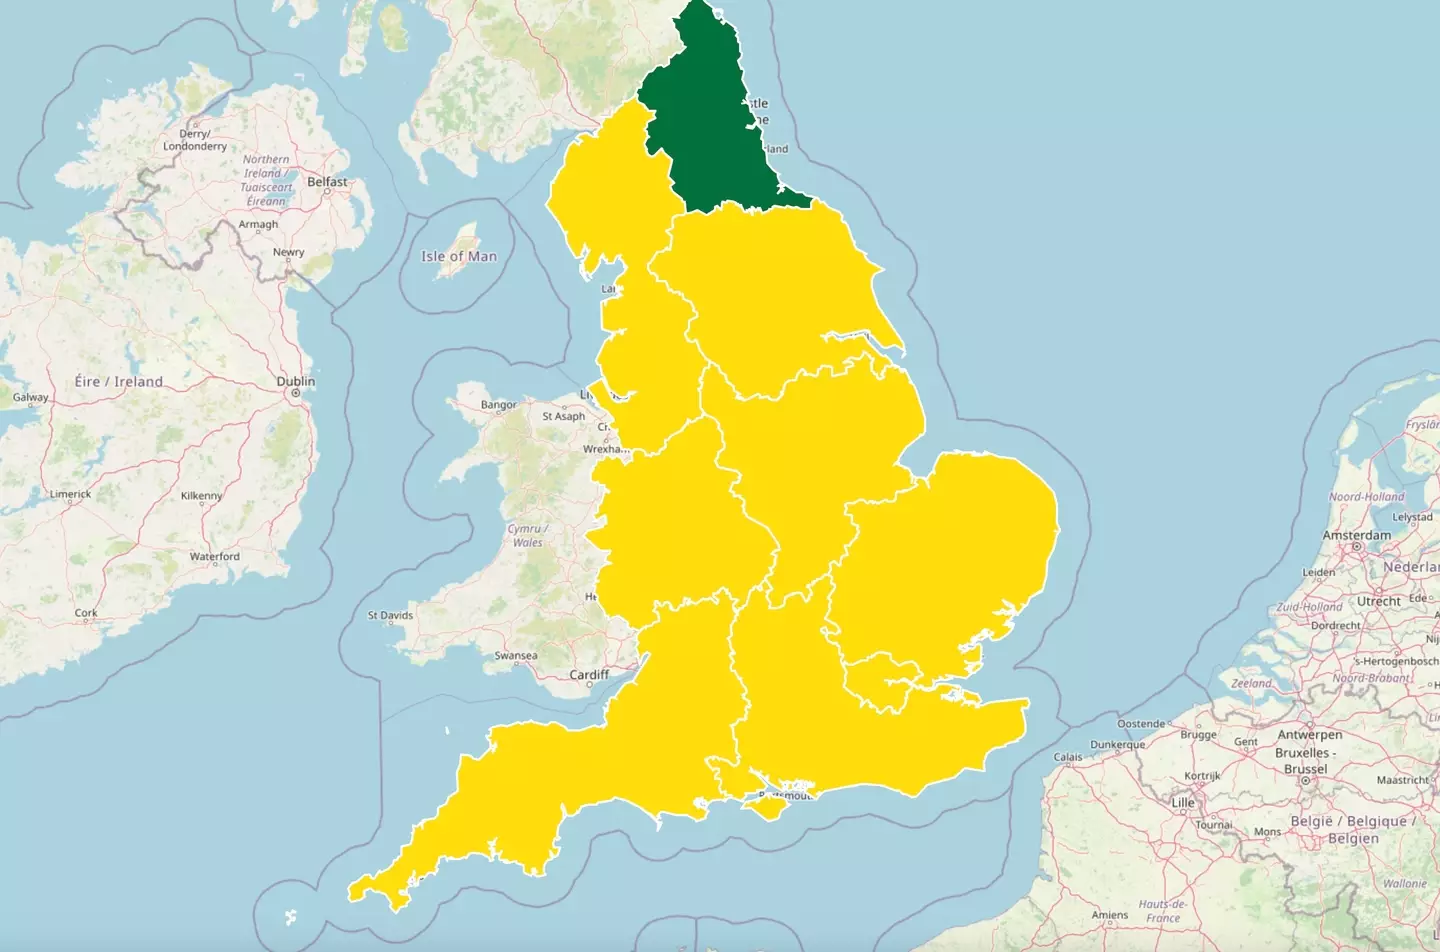 The yellow heat-health alert is in place across the majority of the UK. (UK Health Security Agency)